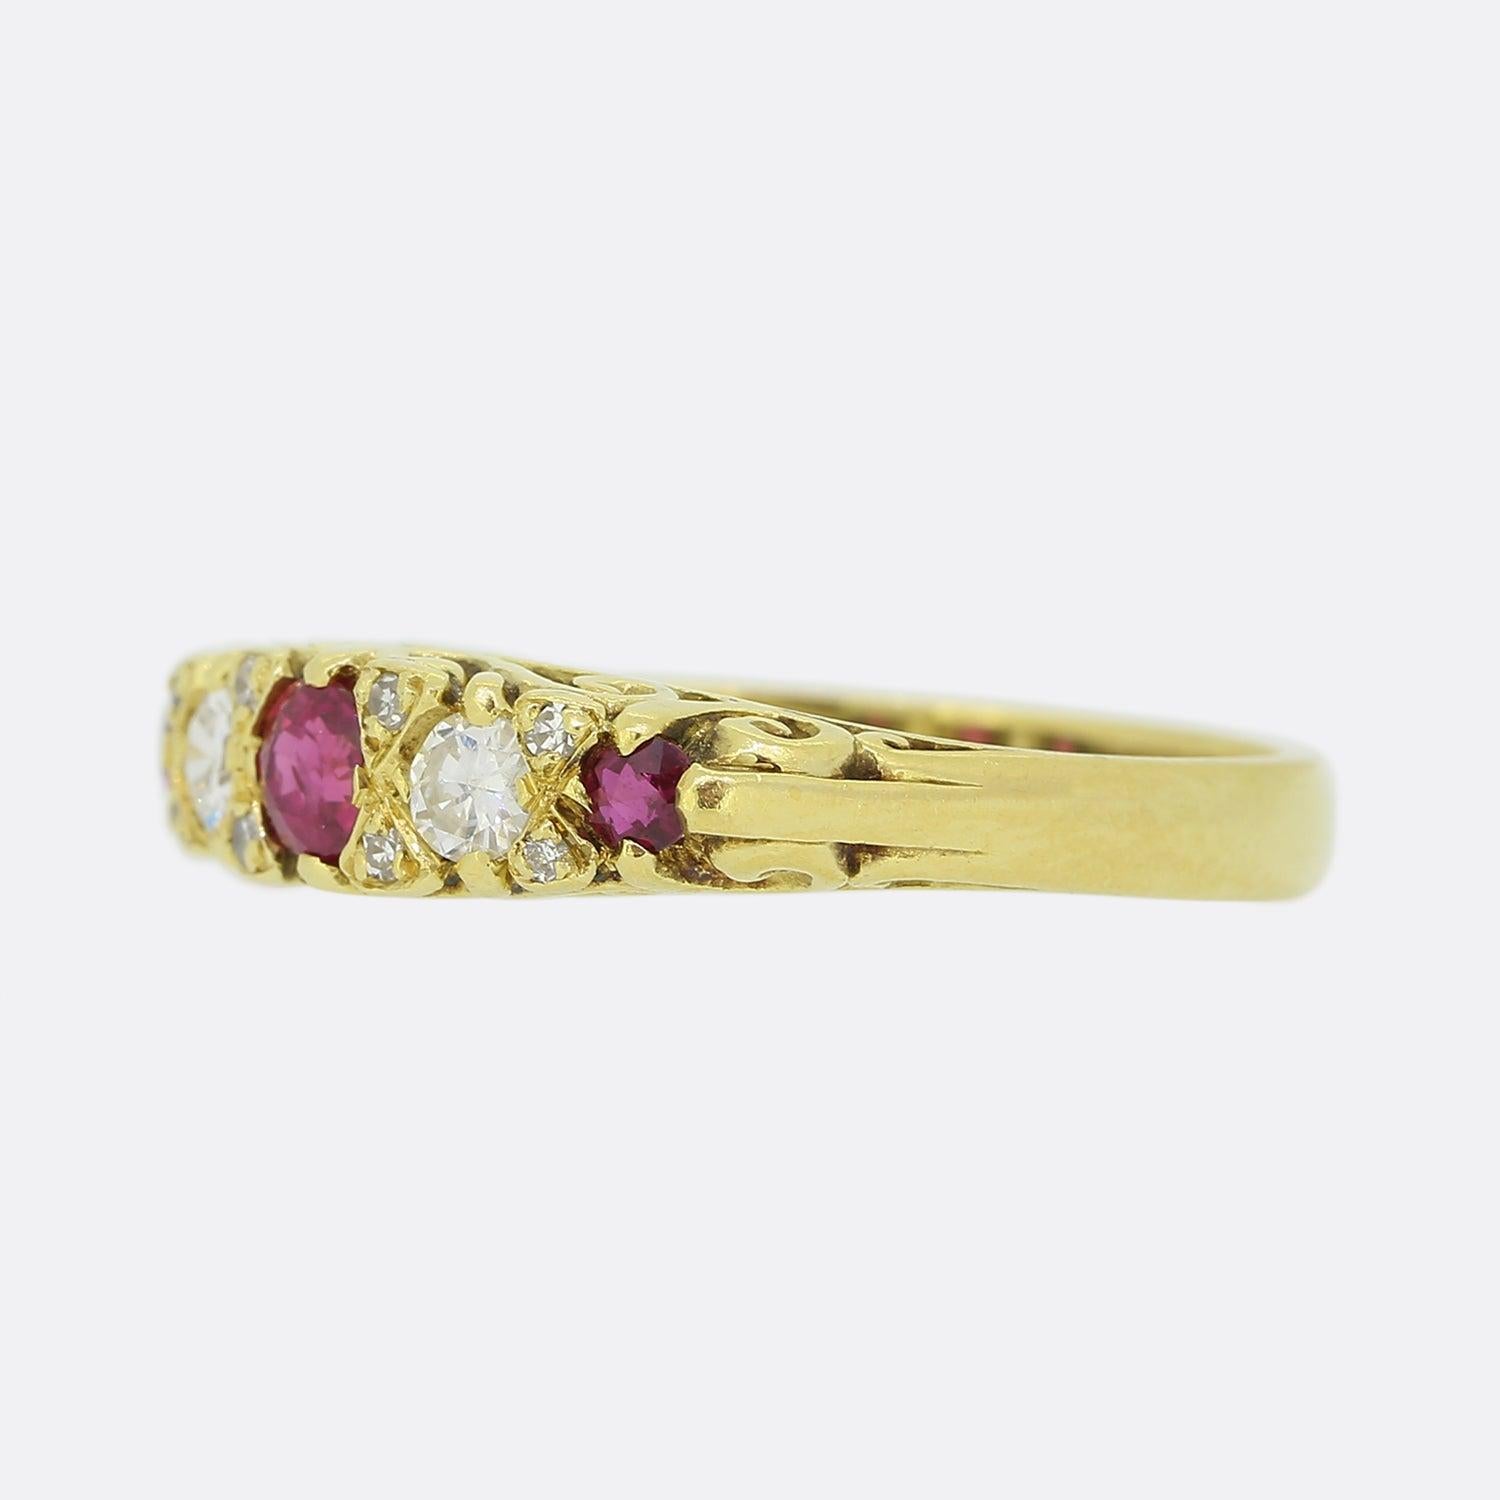 This is a vintage 18ct yellow gold ruby and diamond band ring. The ring features an alternating pattern of rich red rubies and brilliant cut diamonds with two smaller diamonds set in between each stone. 

Condition: Used (Very Good)
Weight: 3.8